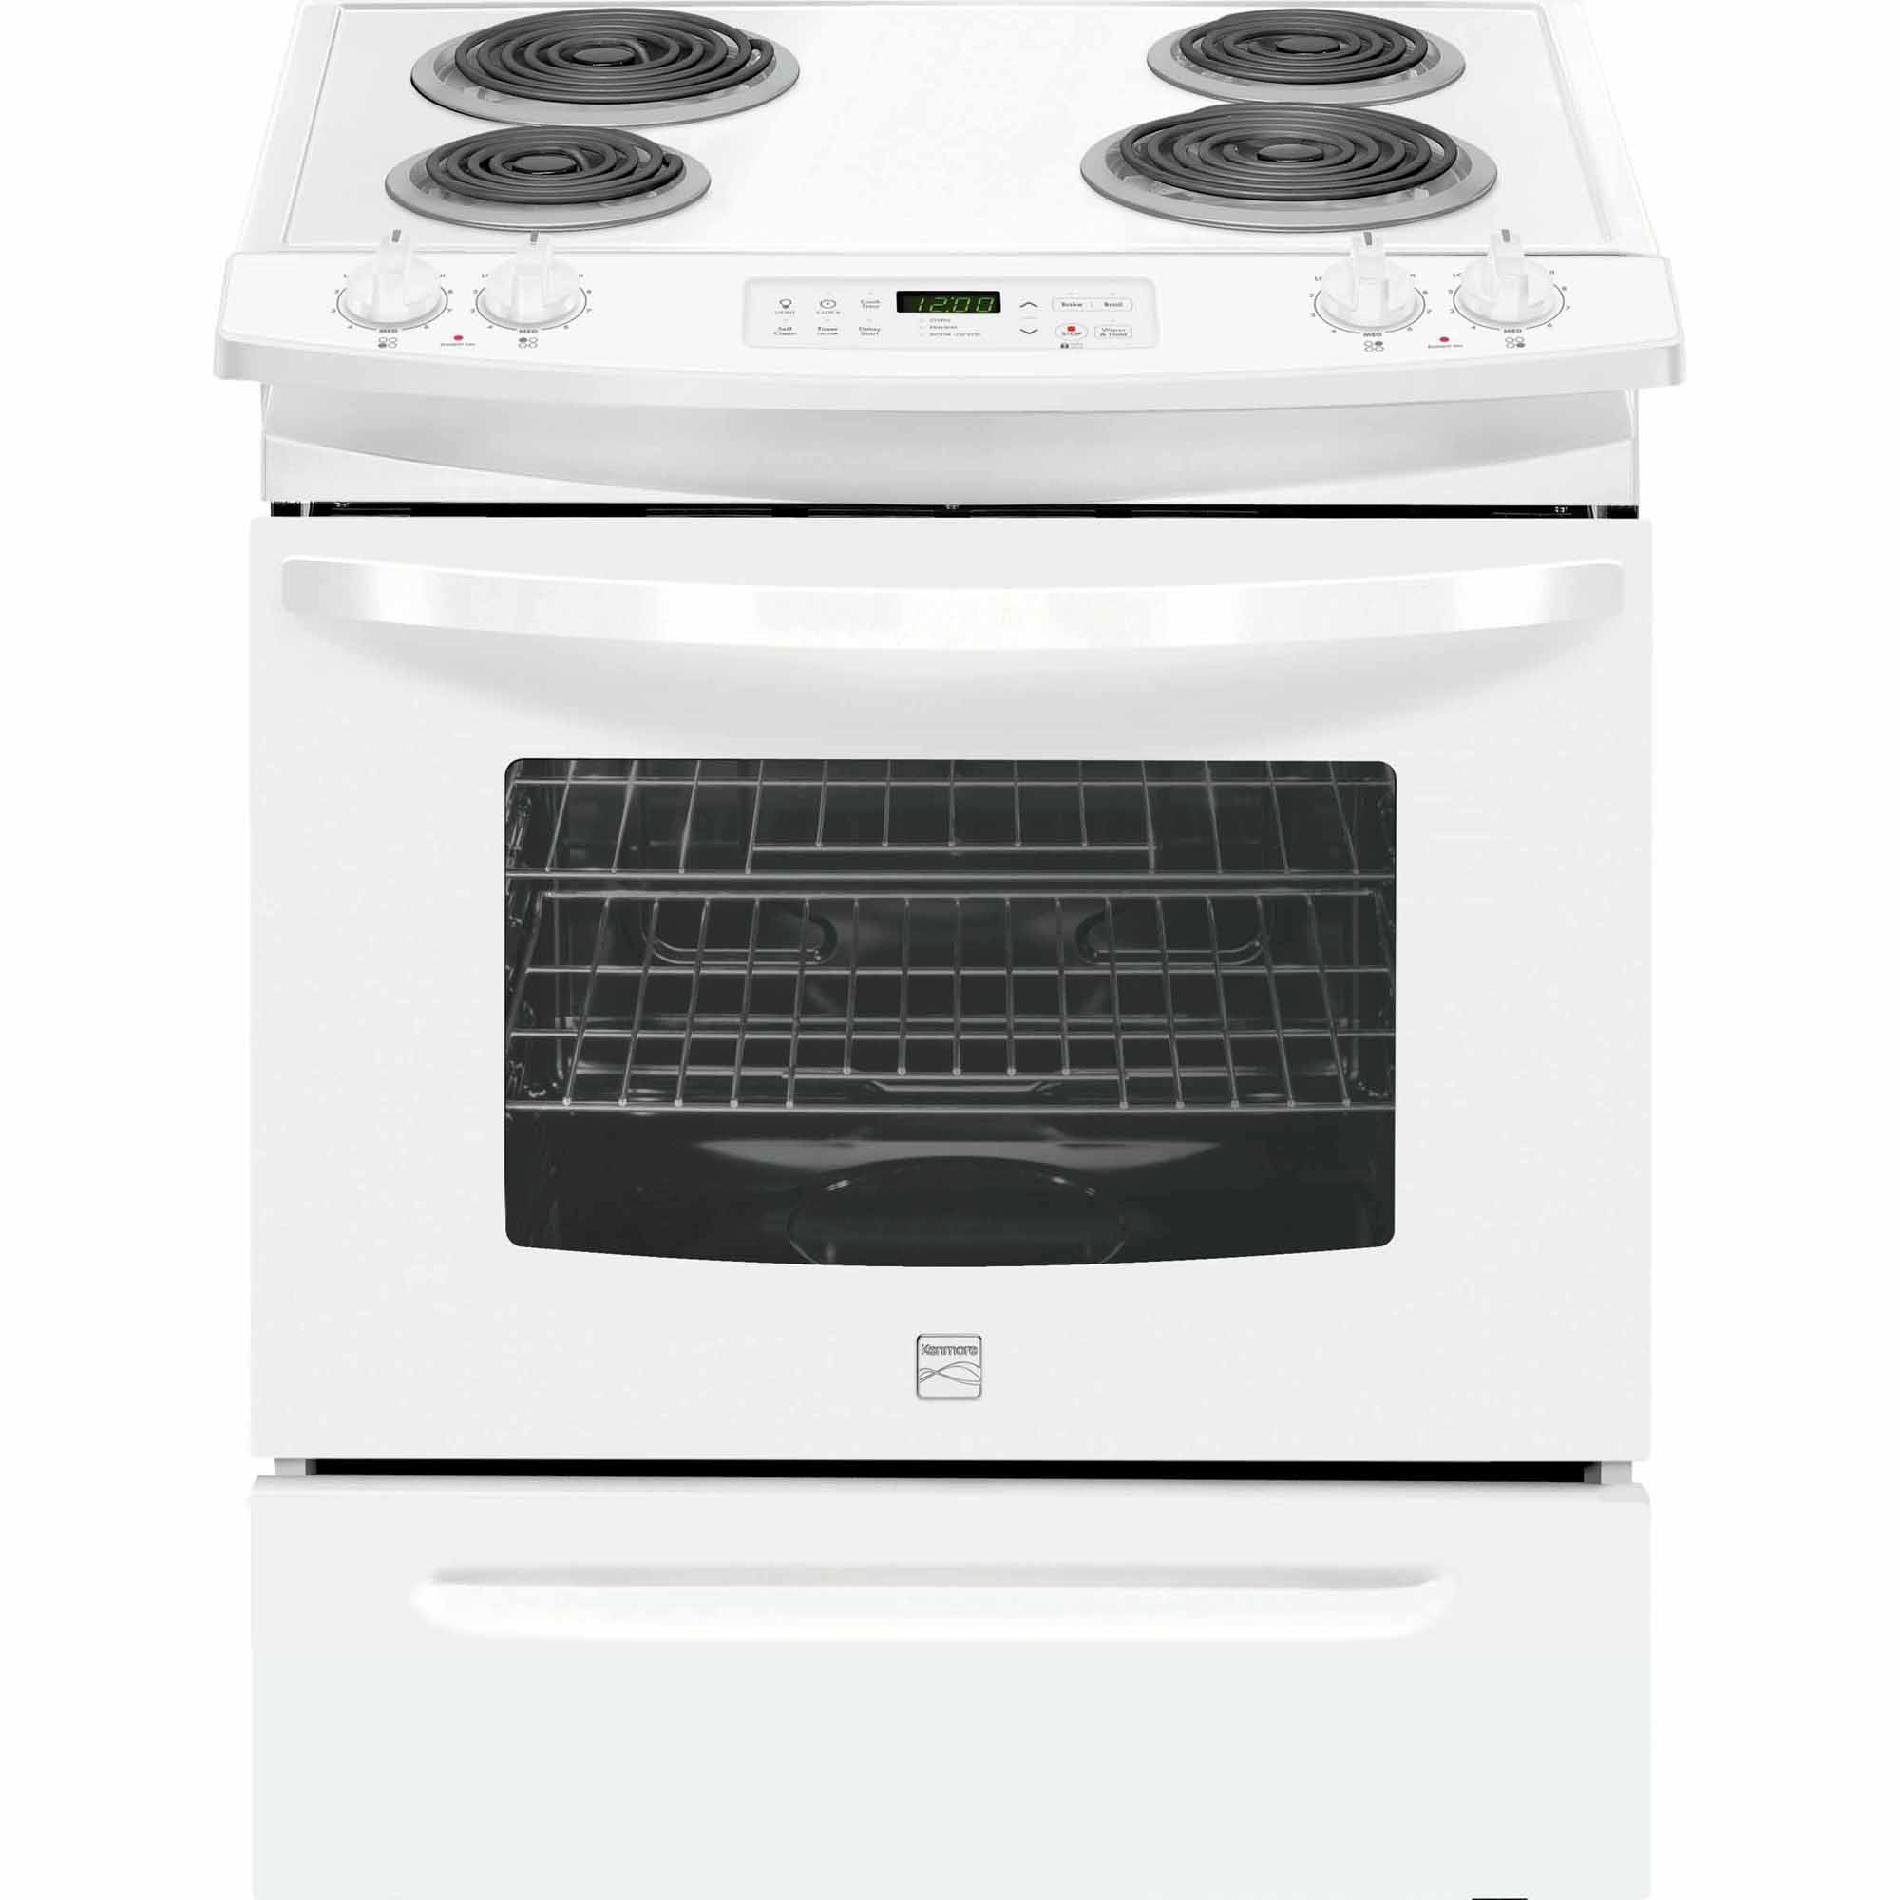 0012505801020 - 42522 4.6 CU. FT. SELF-CLEAN SLIDE-IN ELECTRIC RANGE W/ DELUXE COIL ELEMENTS - WHITE